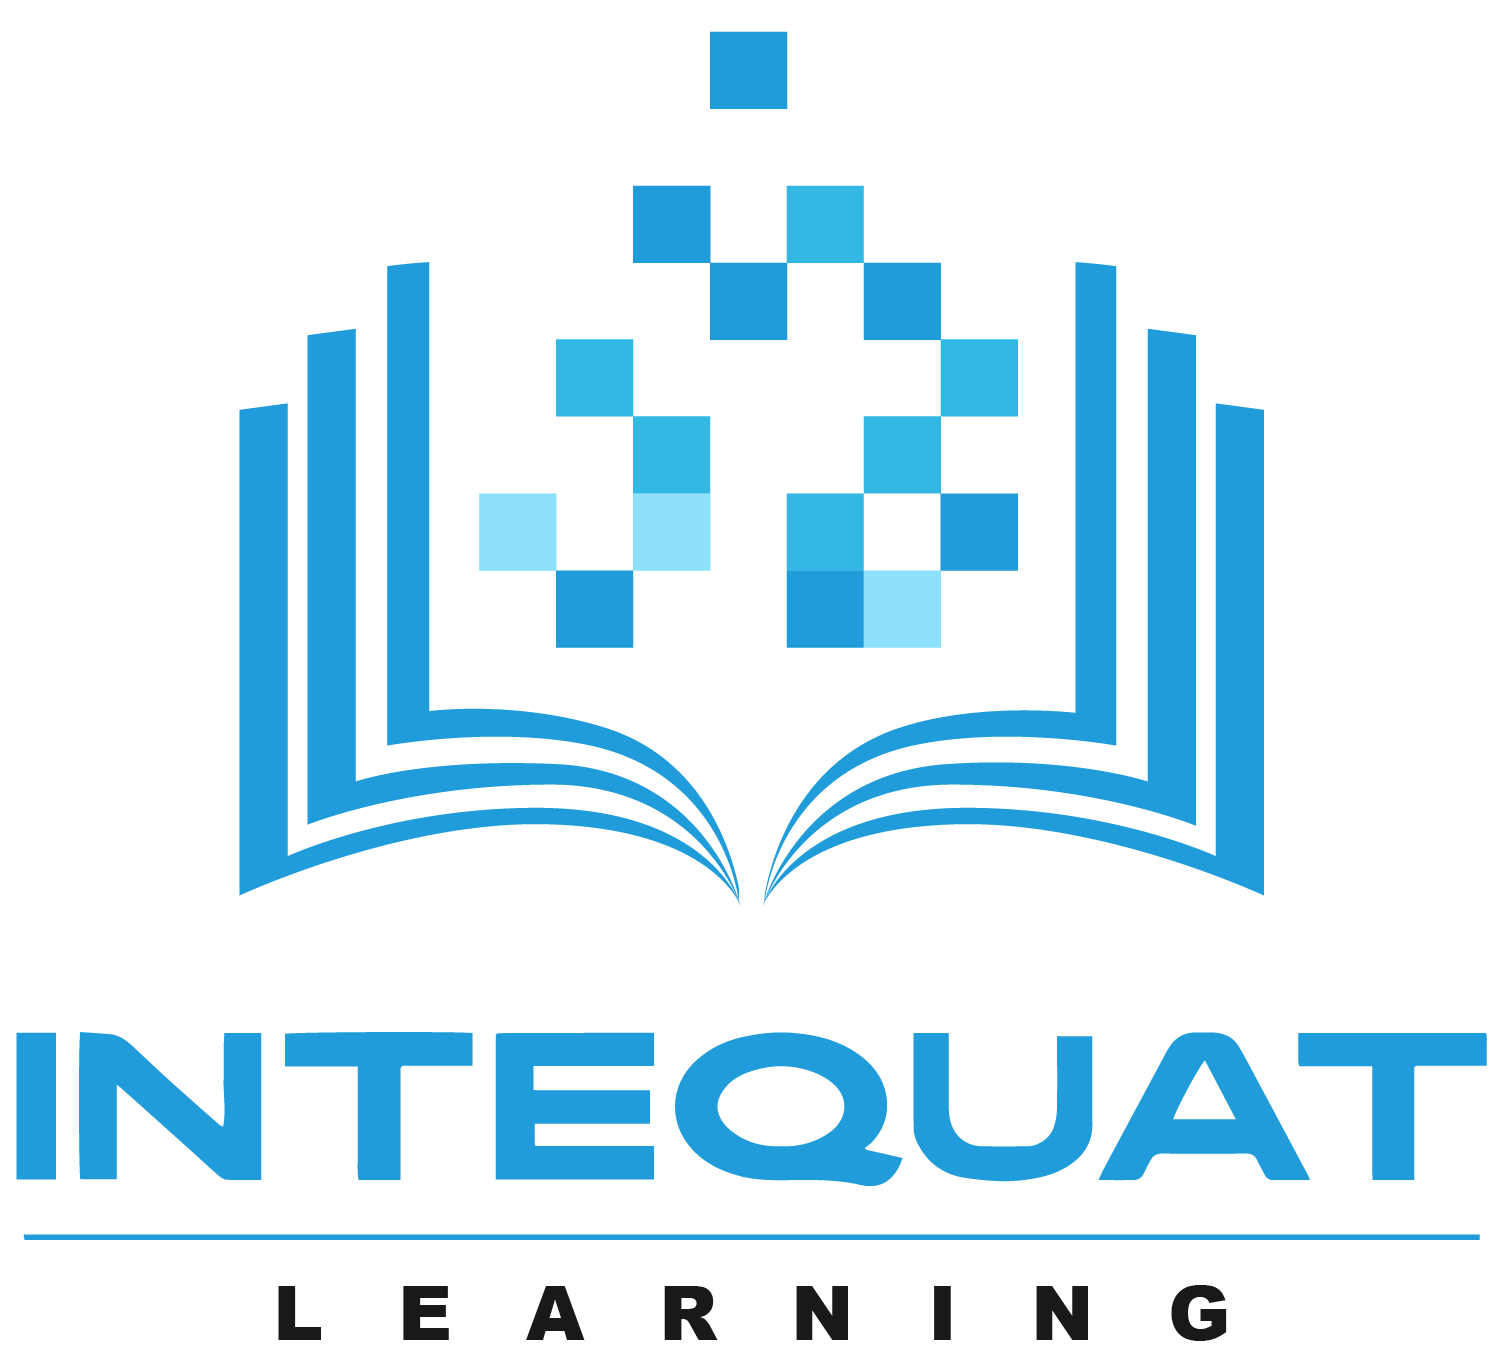 Learn Swahili online with Intequat Learning.